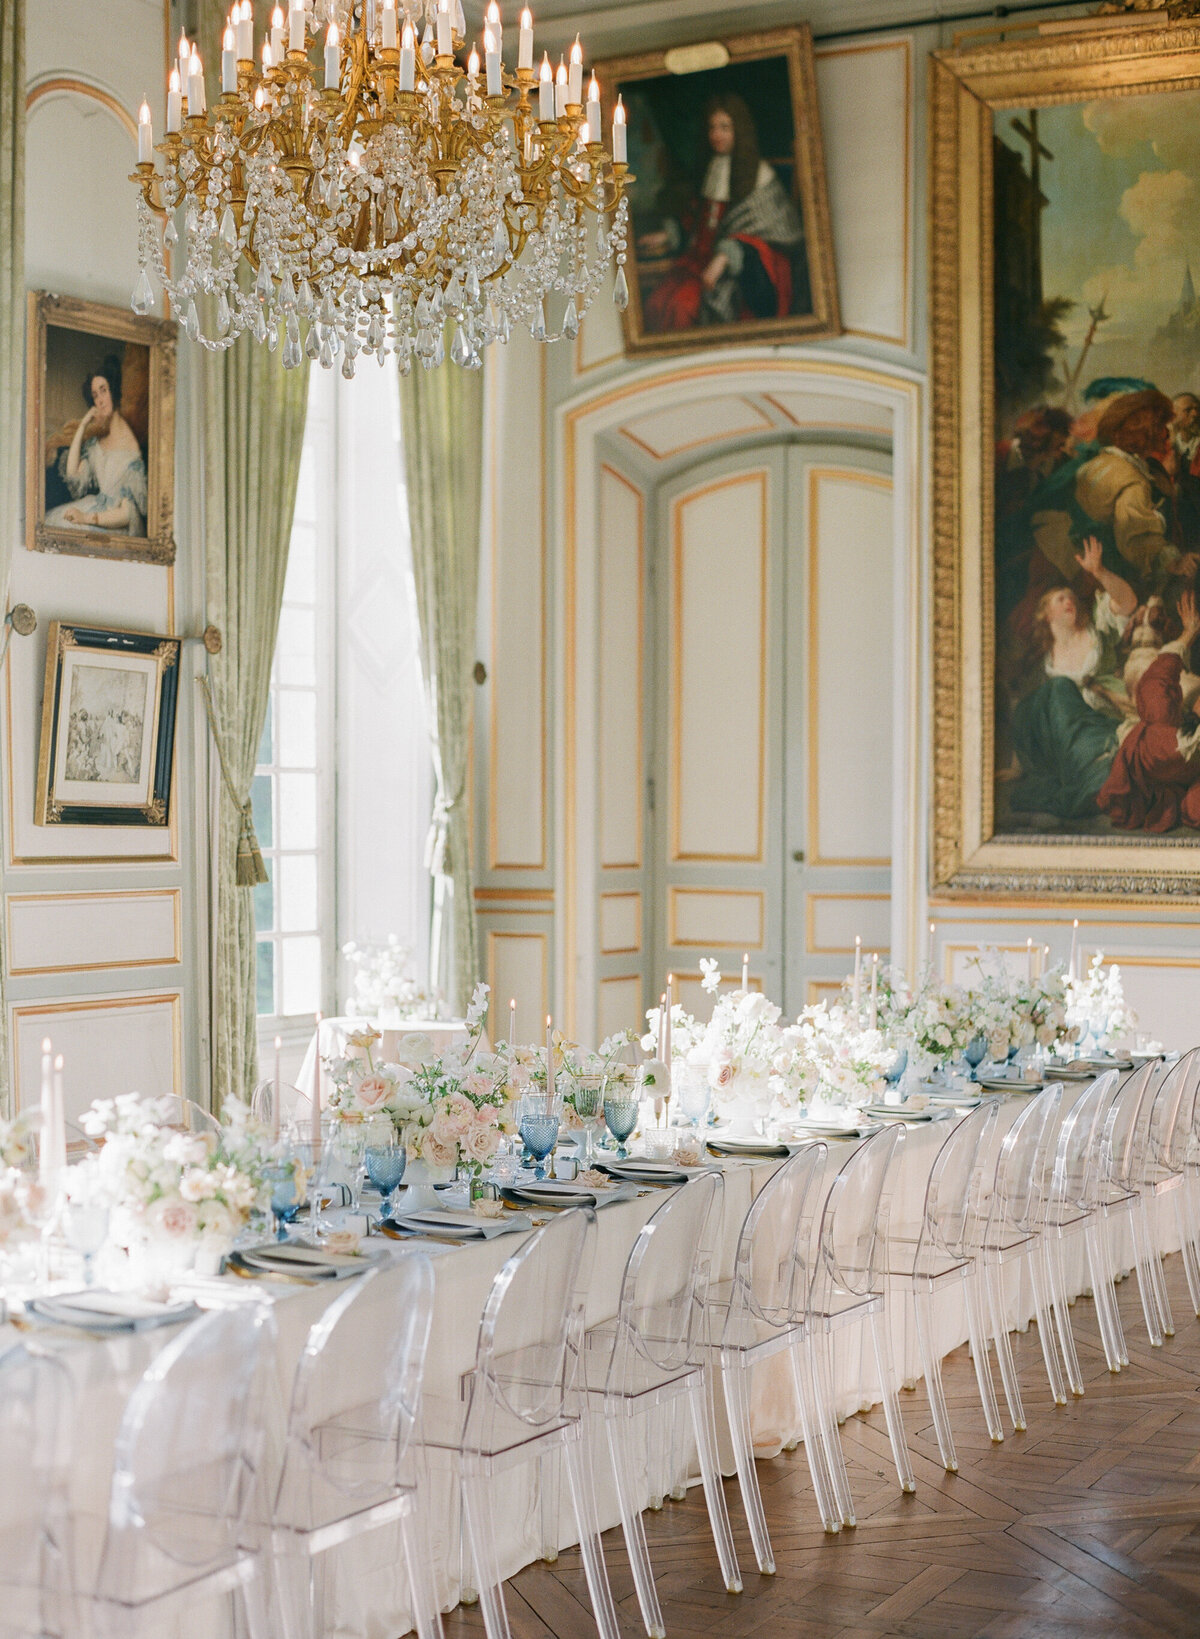 Jennifer Fox Weddings English speaking wedding planning & design agency in France crafting refined and bespoke weddings and celebrations Provence, Paris and destination Laurel-Chris-Chateau-de-Champlatreaux-Molly-Carr-Photography-81